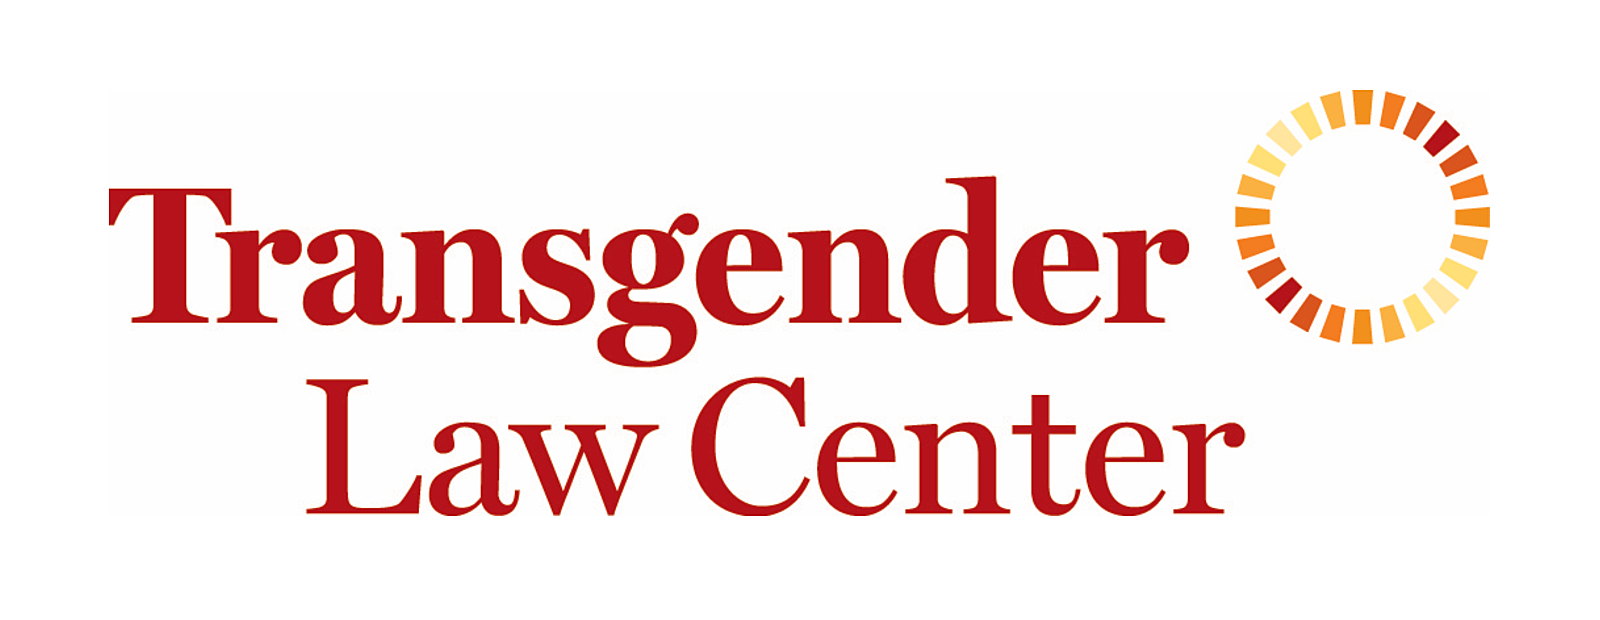 Transgender Law Center | Give Out Day